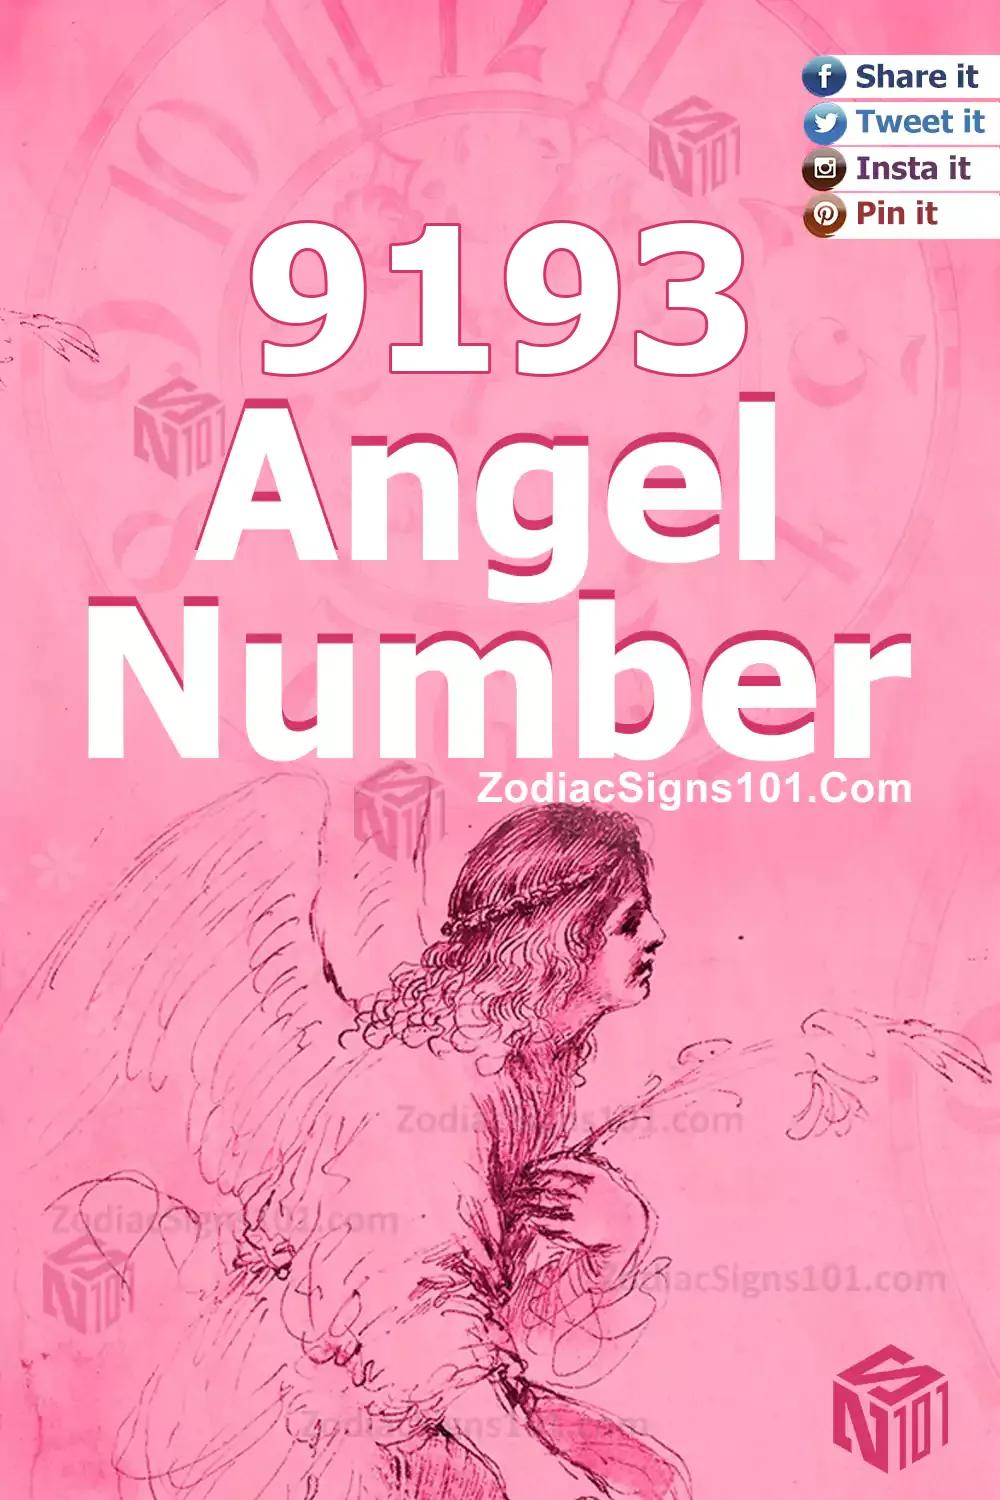 9193 Angel Number Meaning